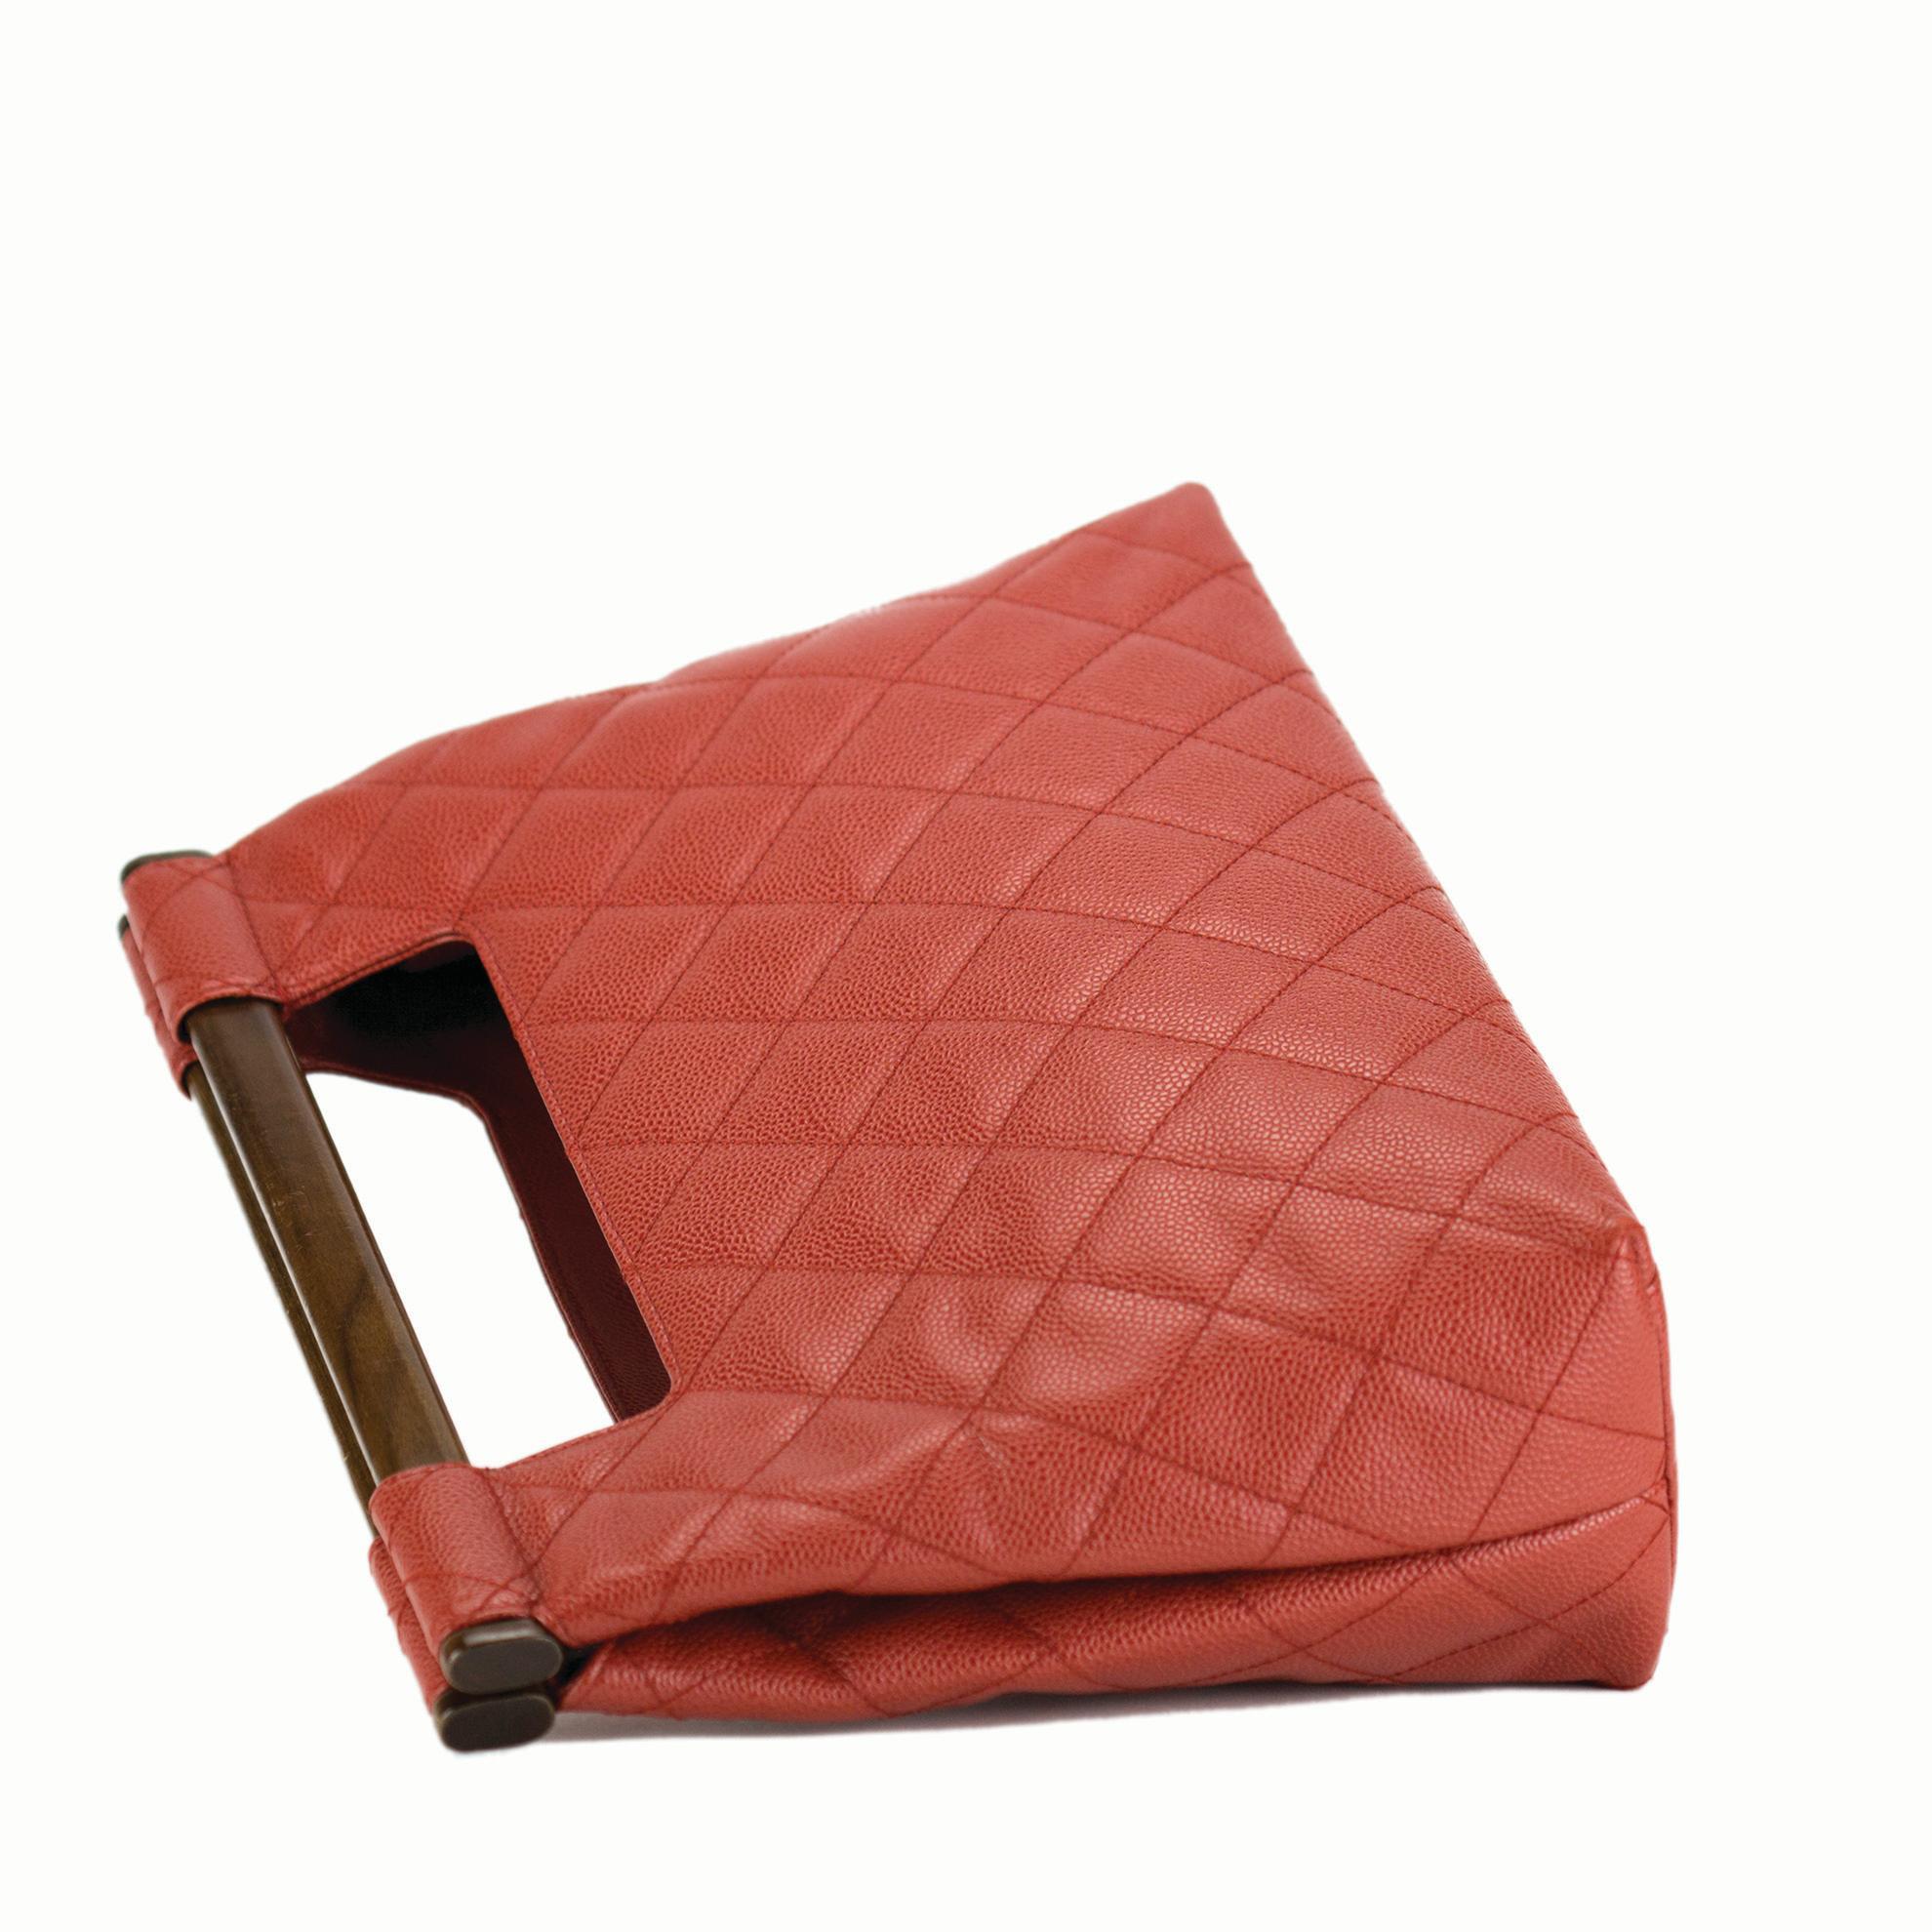 Chanel 2003 Holz Top Handle Rare Red Caviar Jumbo Kelly Envelope Clutch Tote Bag im Angebot 1